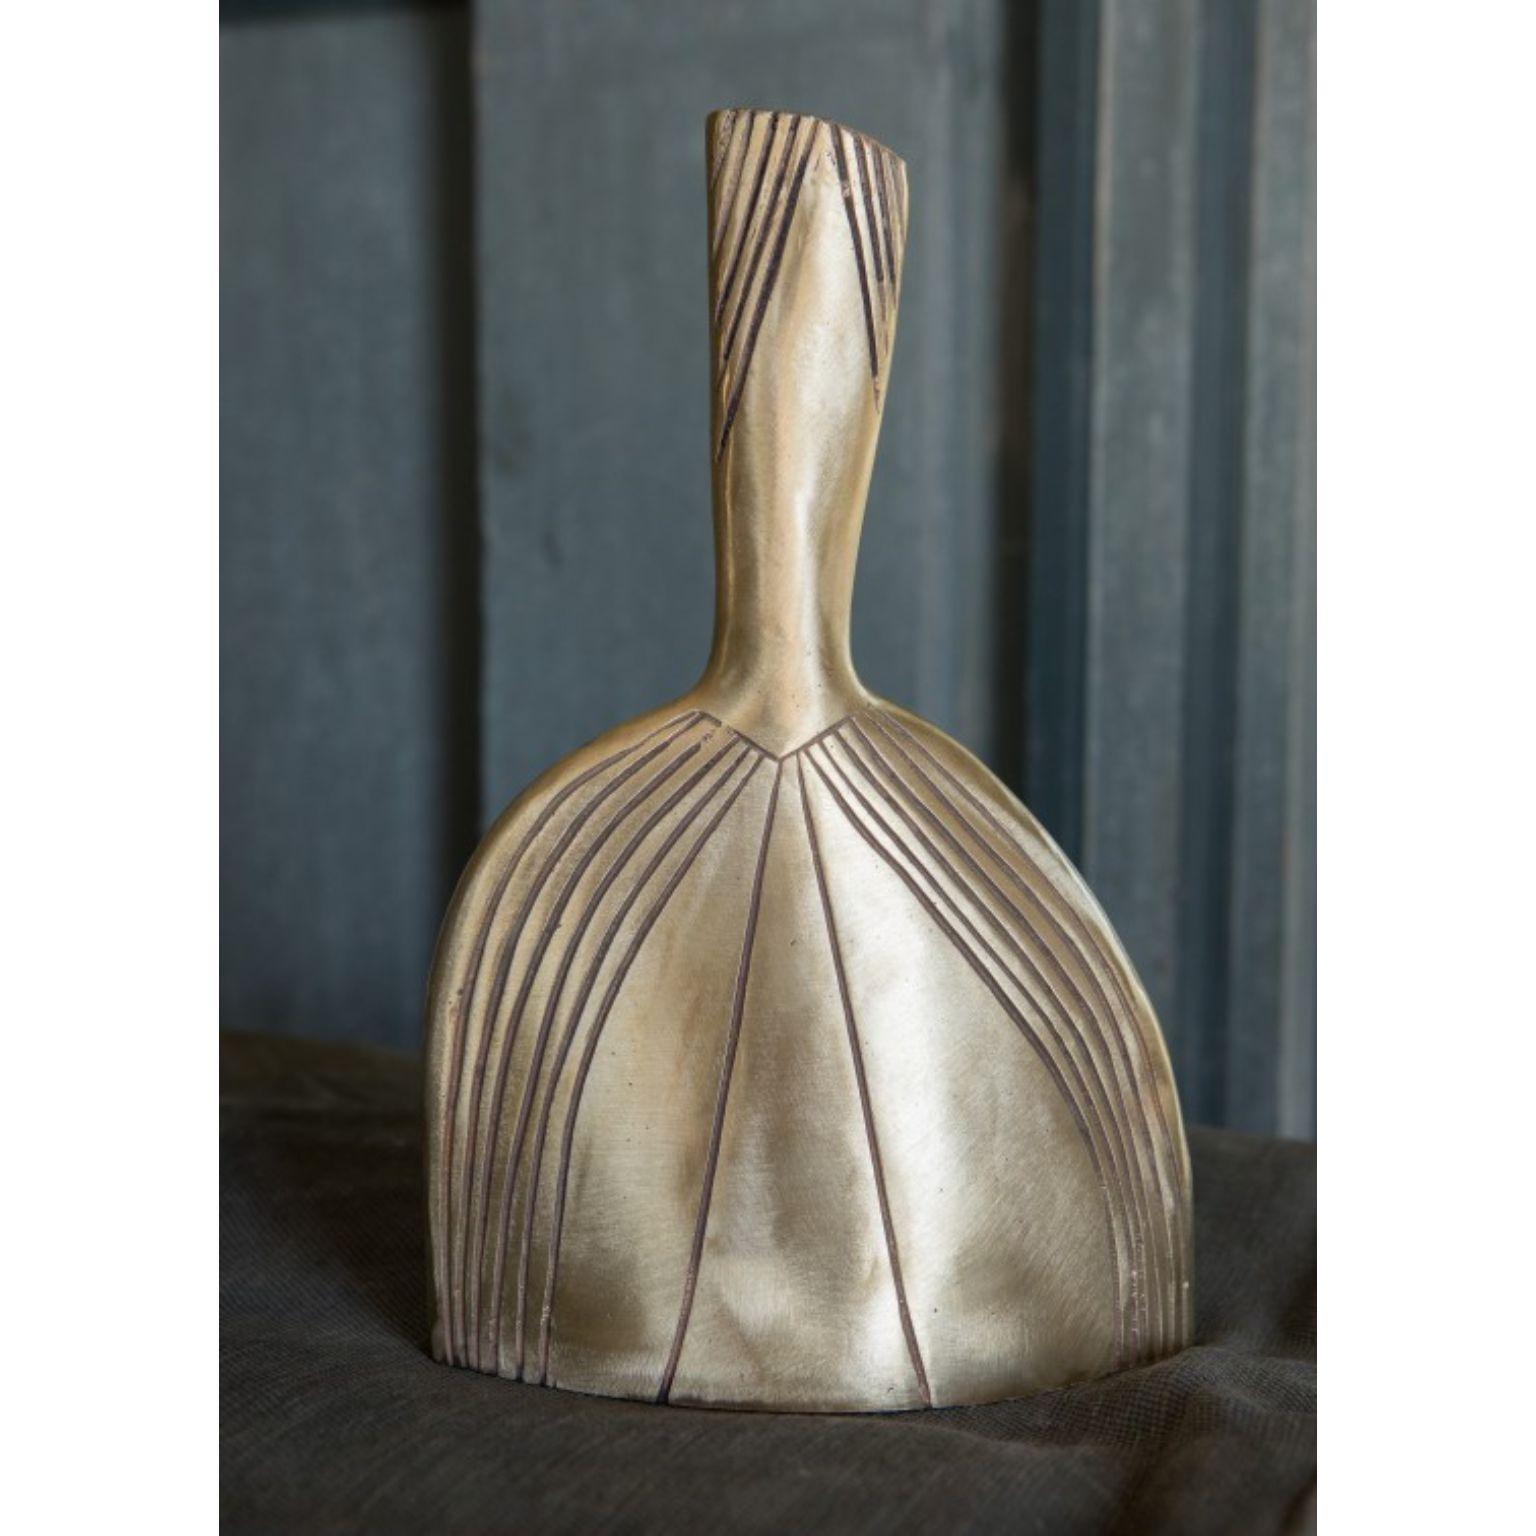 Bronze Vase B by Mylene Niedzialkowski
Dimensions: D 7 x W 18 x H 28 cm. 
Materials: Bronze.

Bronze soliflore cast in the south-east of France.

All our collections start from an exploration, from a curiosity for the material, from the discovery of